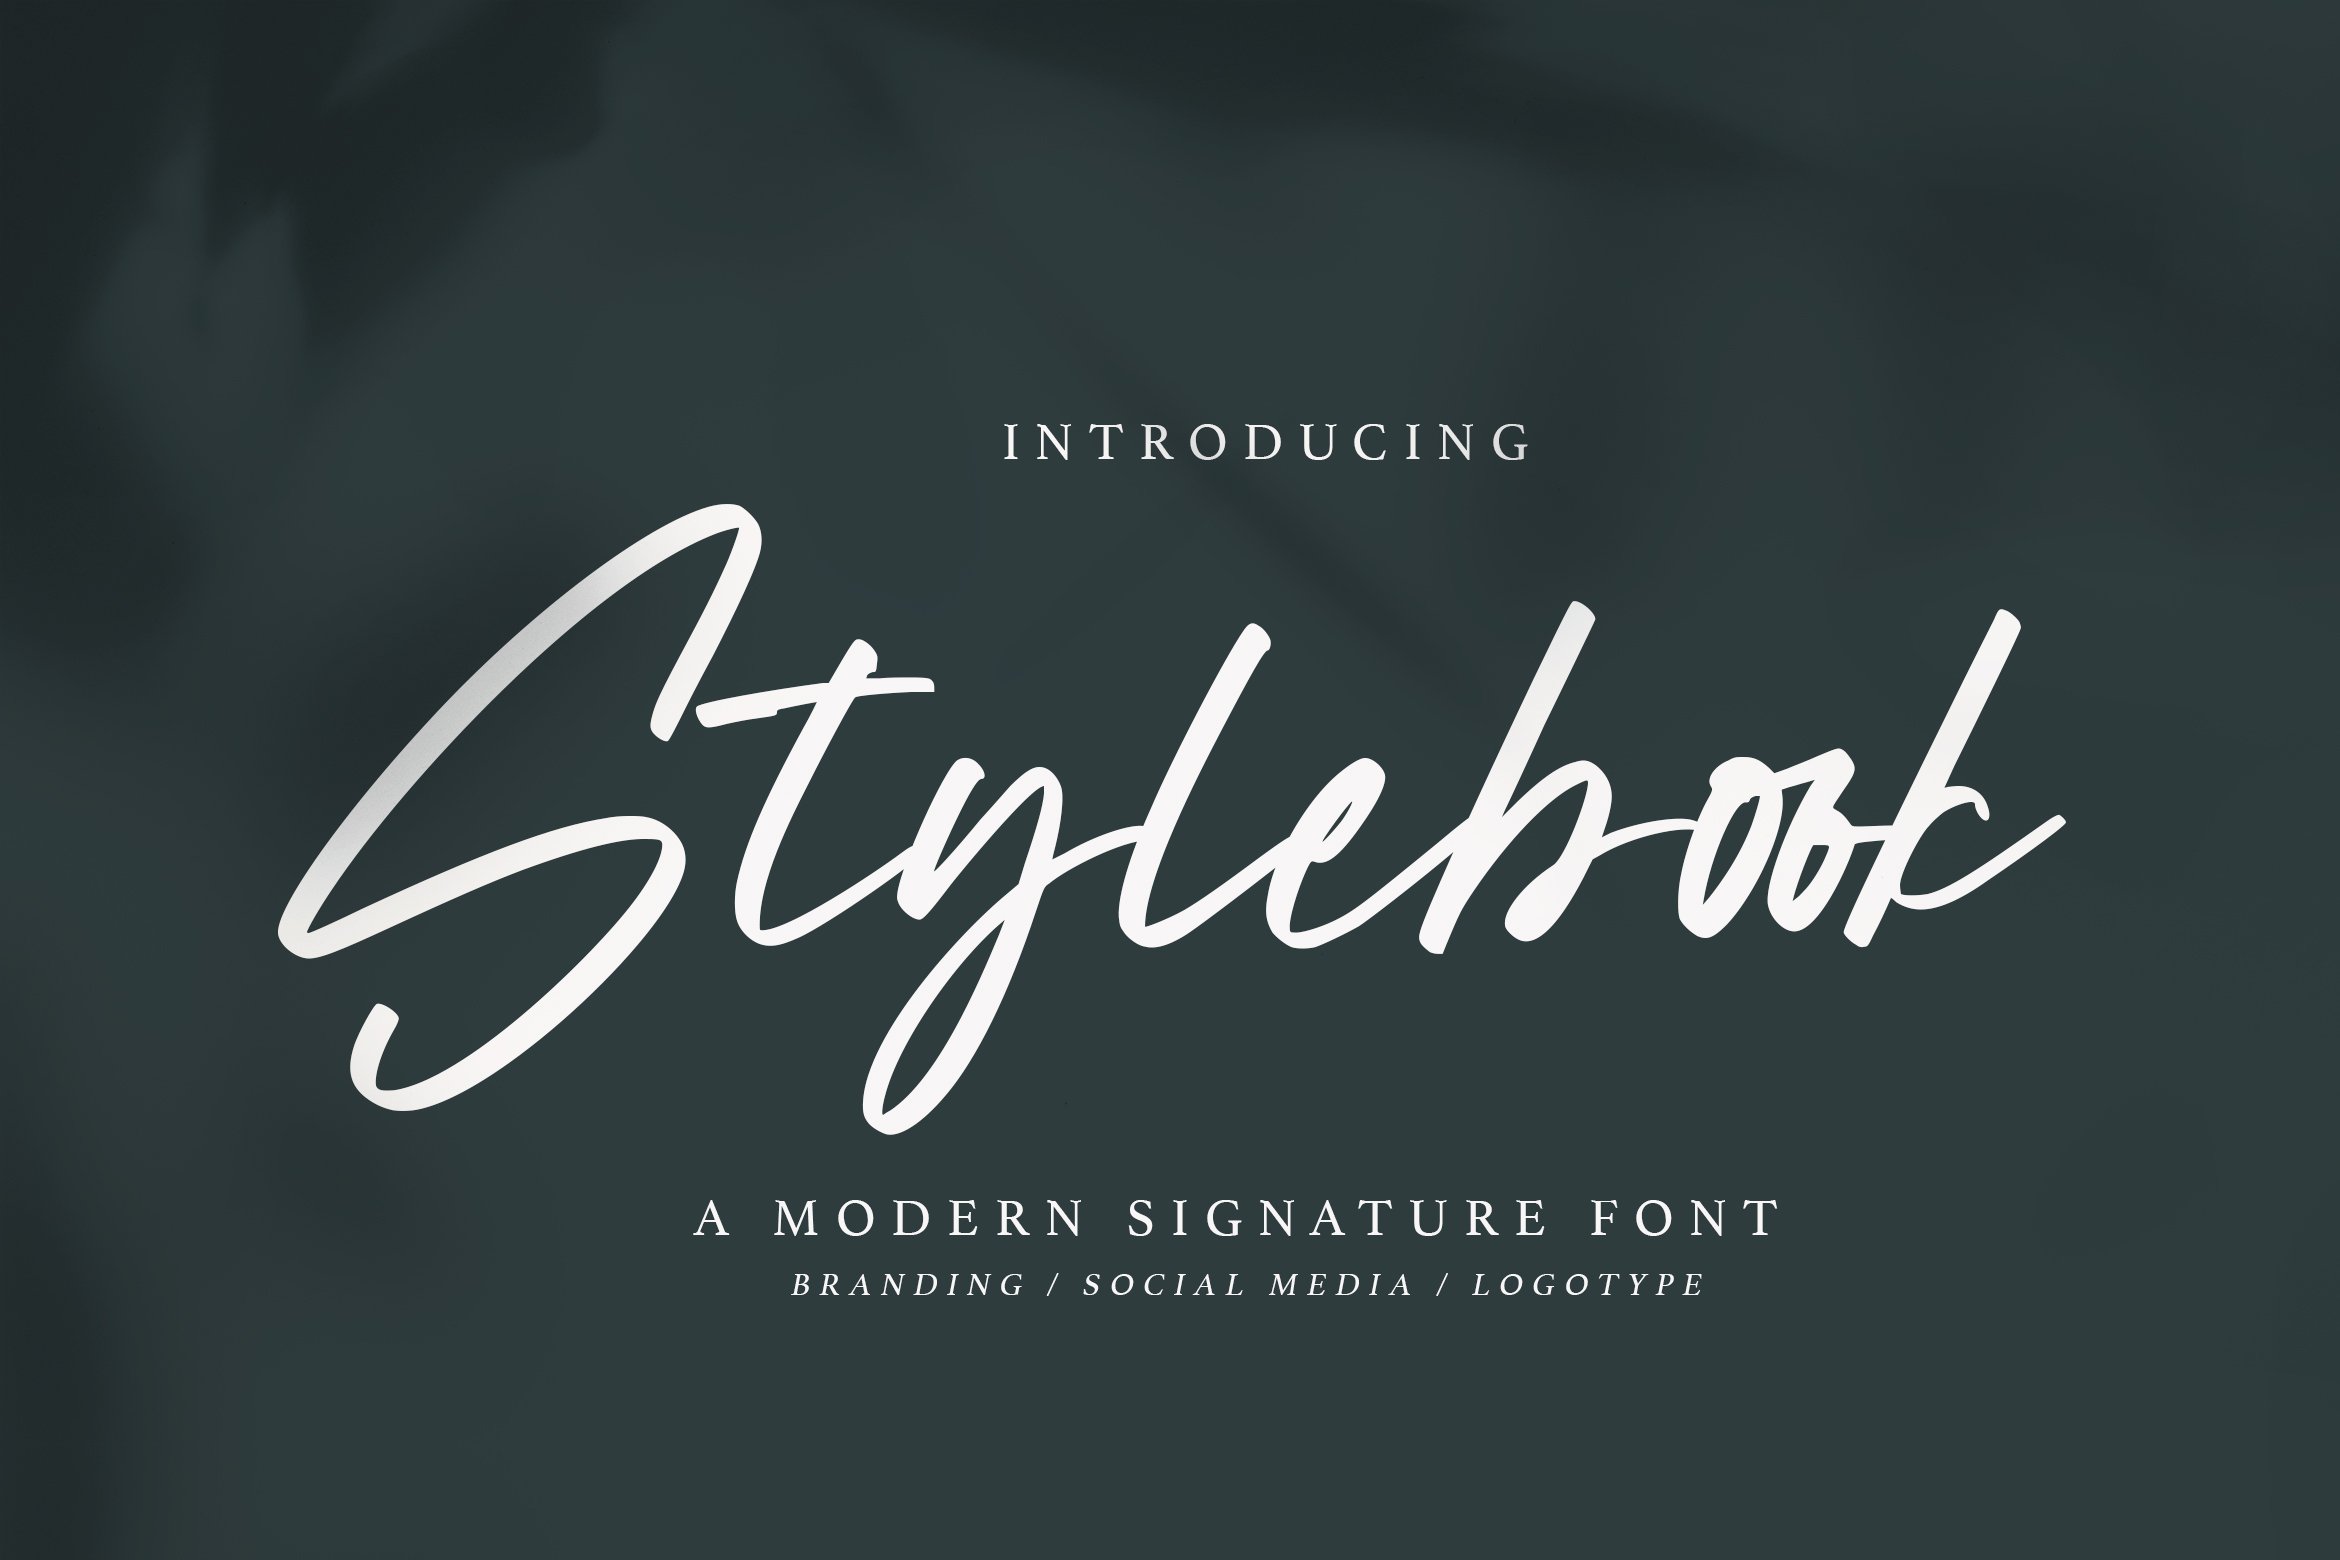 Stylebook - Modern Signature Font cover image.